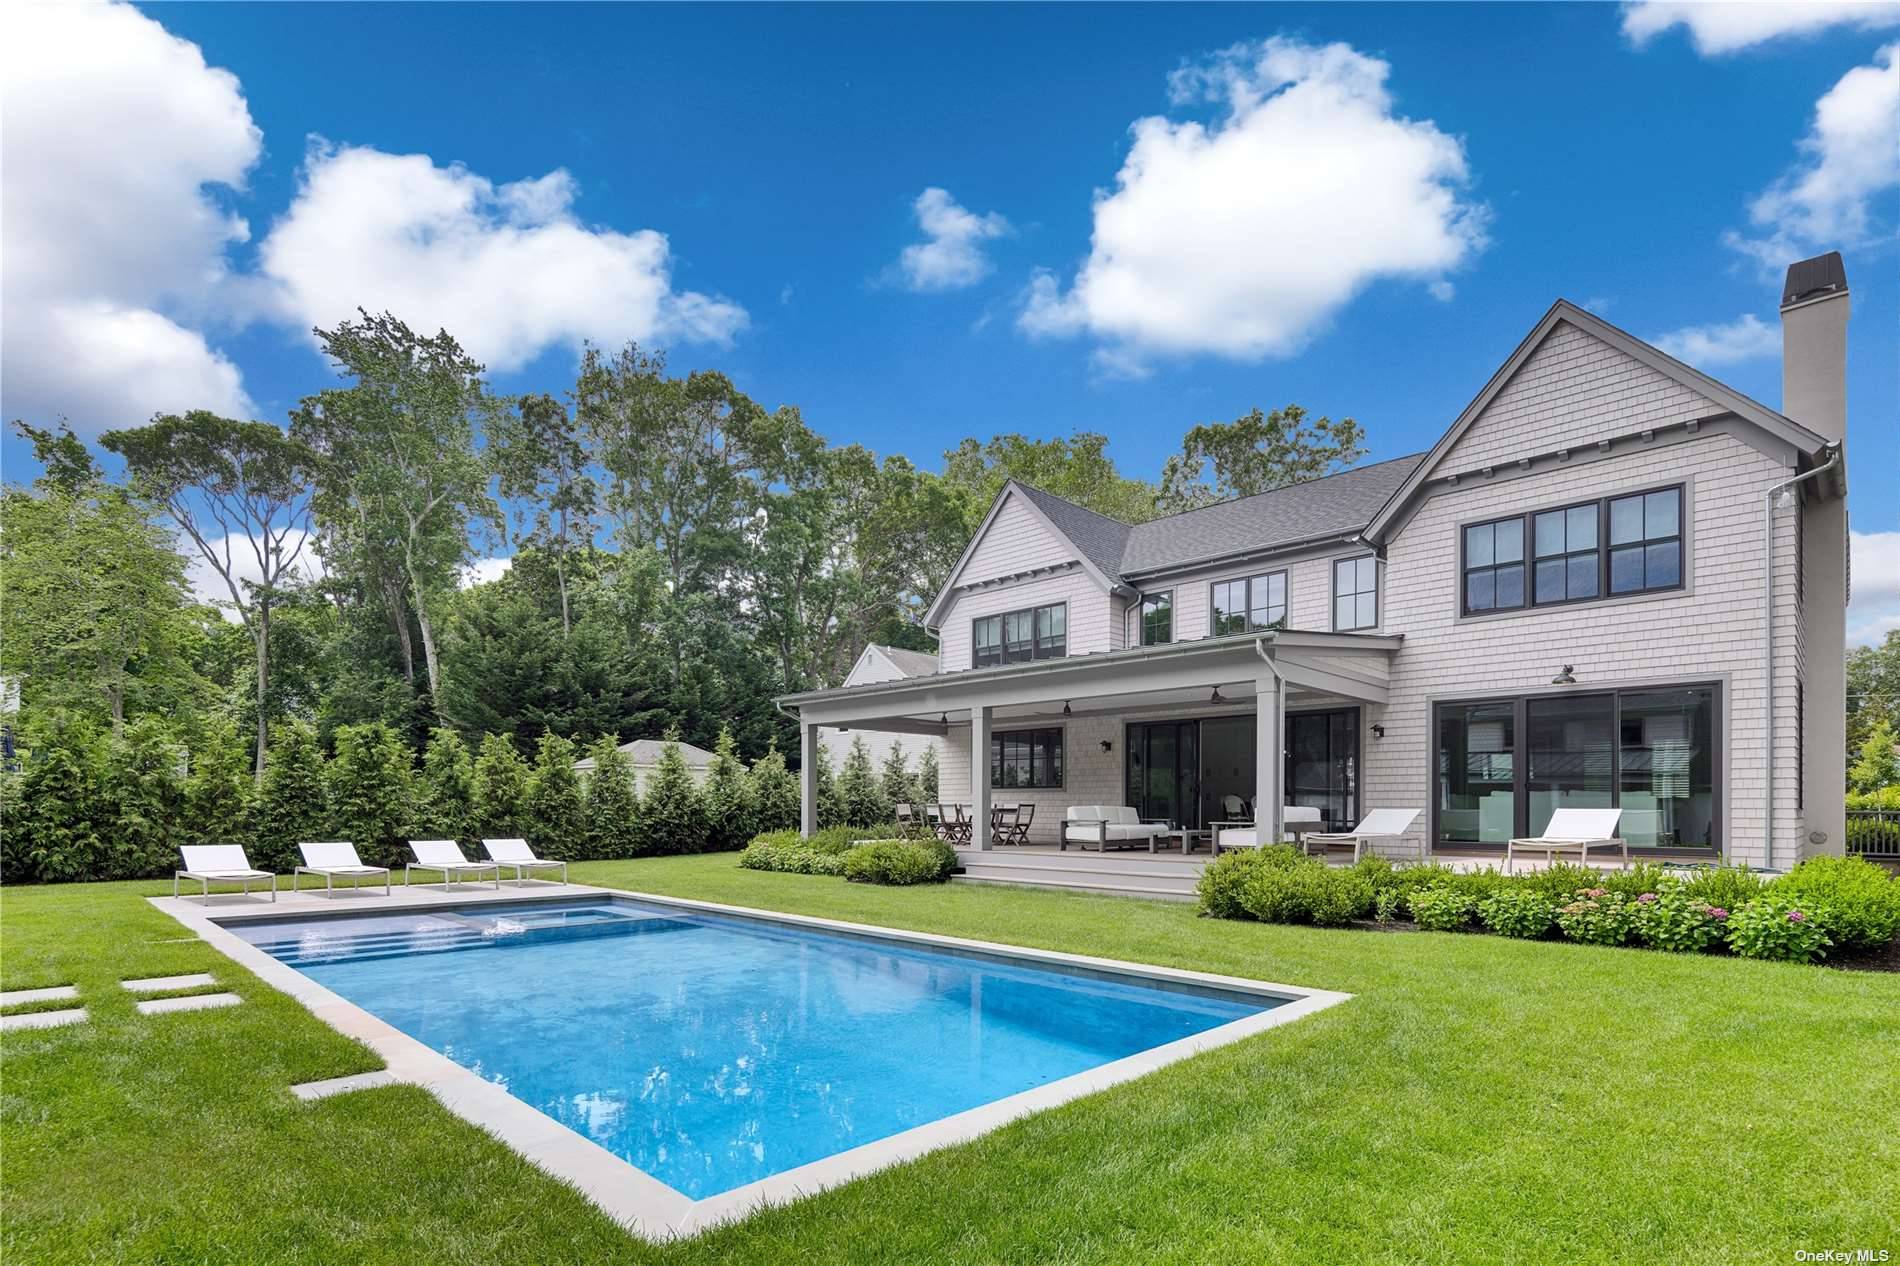 This 5, 300sqft. new construction transitional masterpiece is the quintessential Hamptons home located in Bayview Oaks, a Southampton waterfront community with access to Peconic Bay.